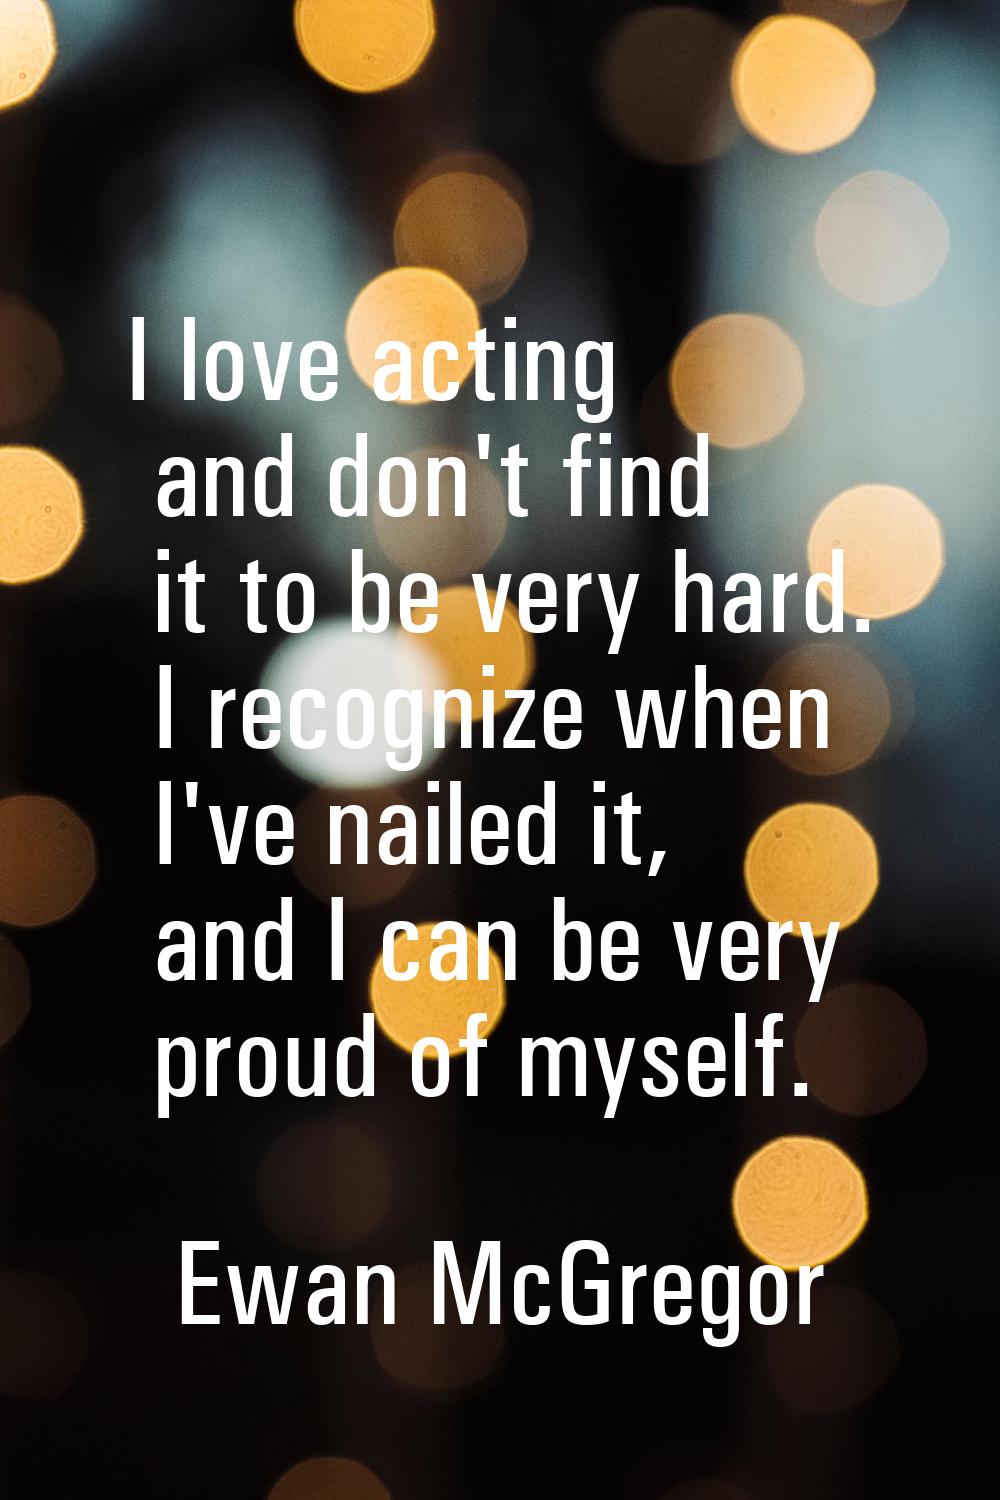 I love acting and don't find it to be very hard. I recognize when I've nailed it, and I can be very